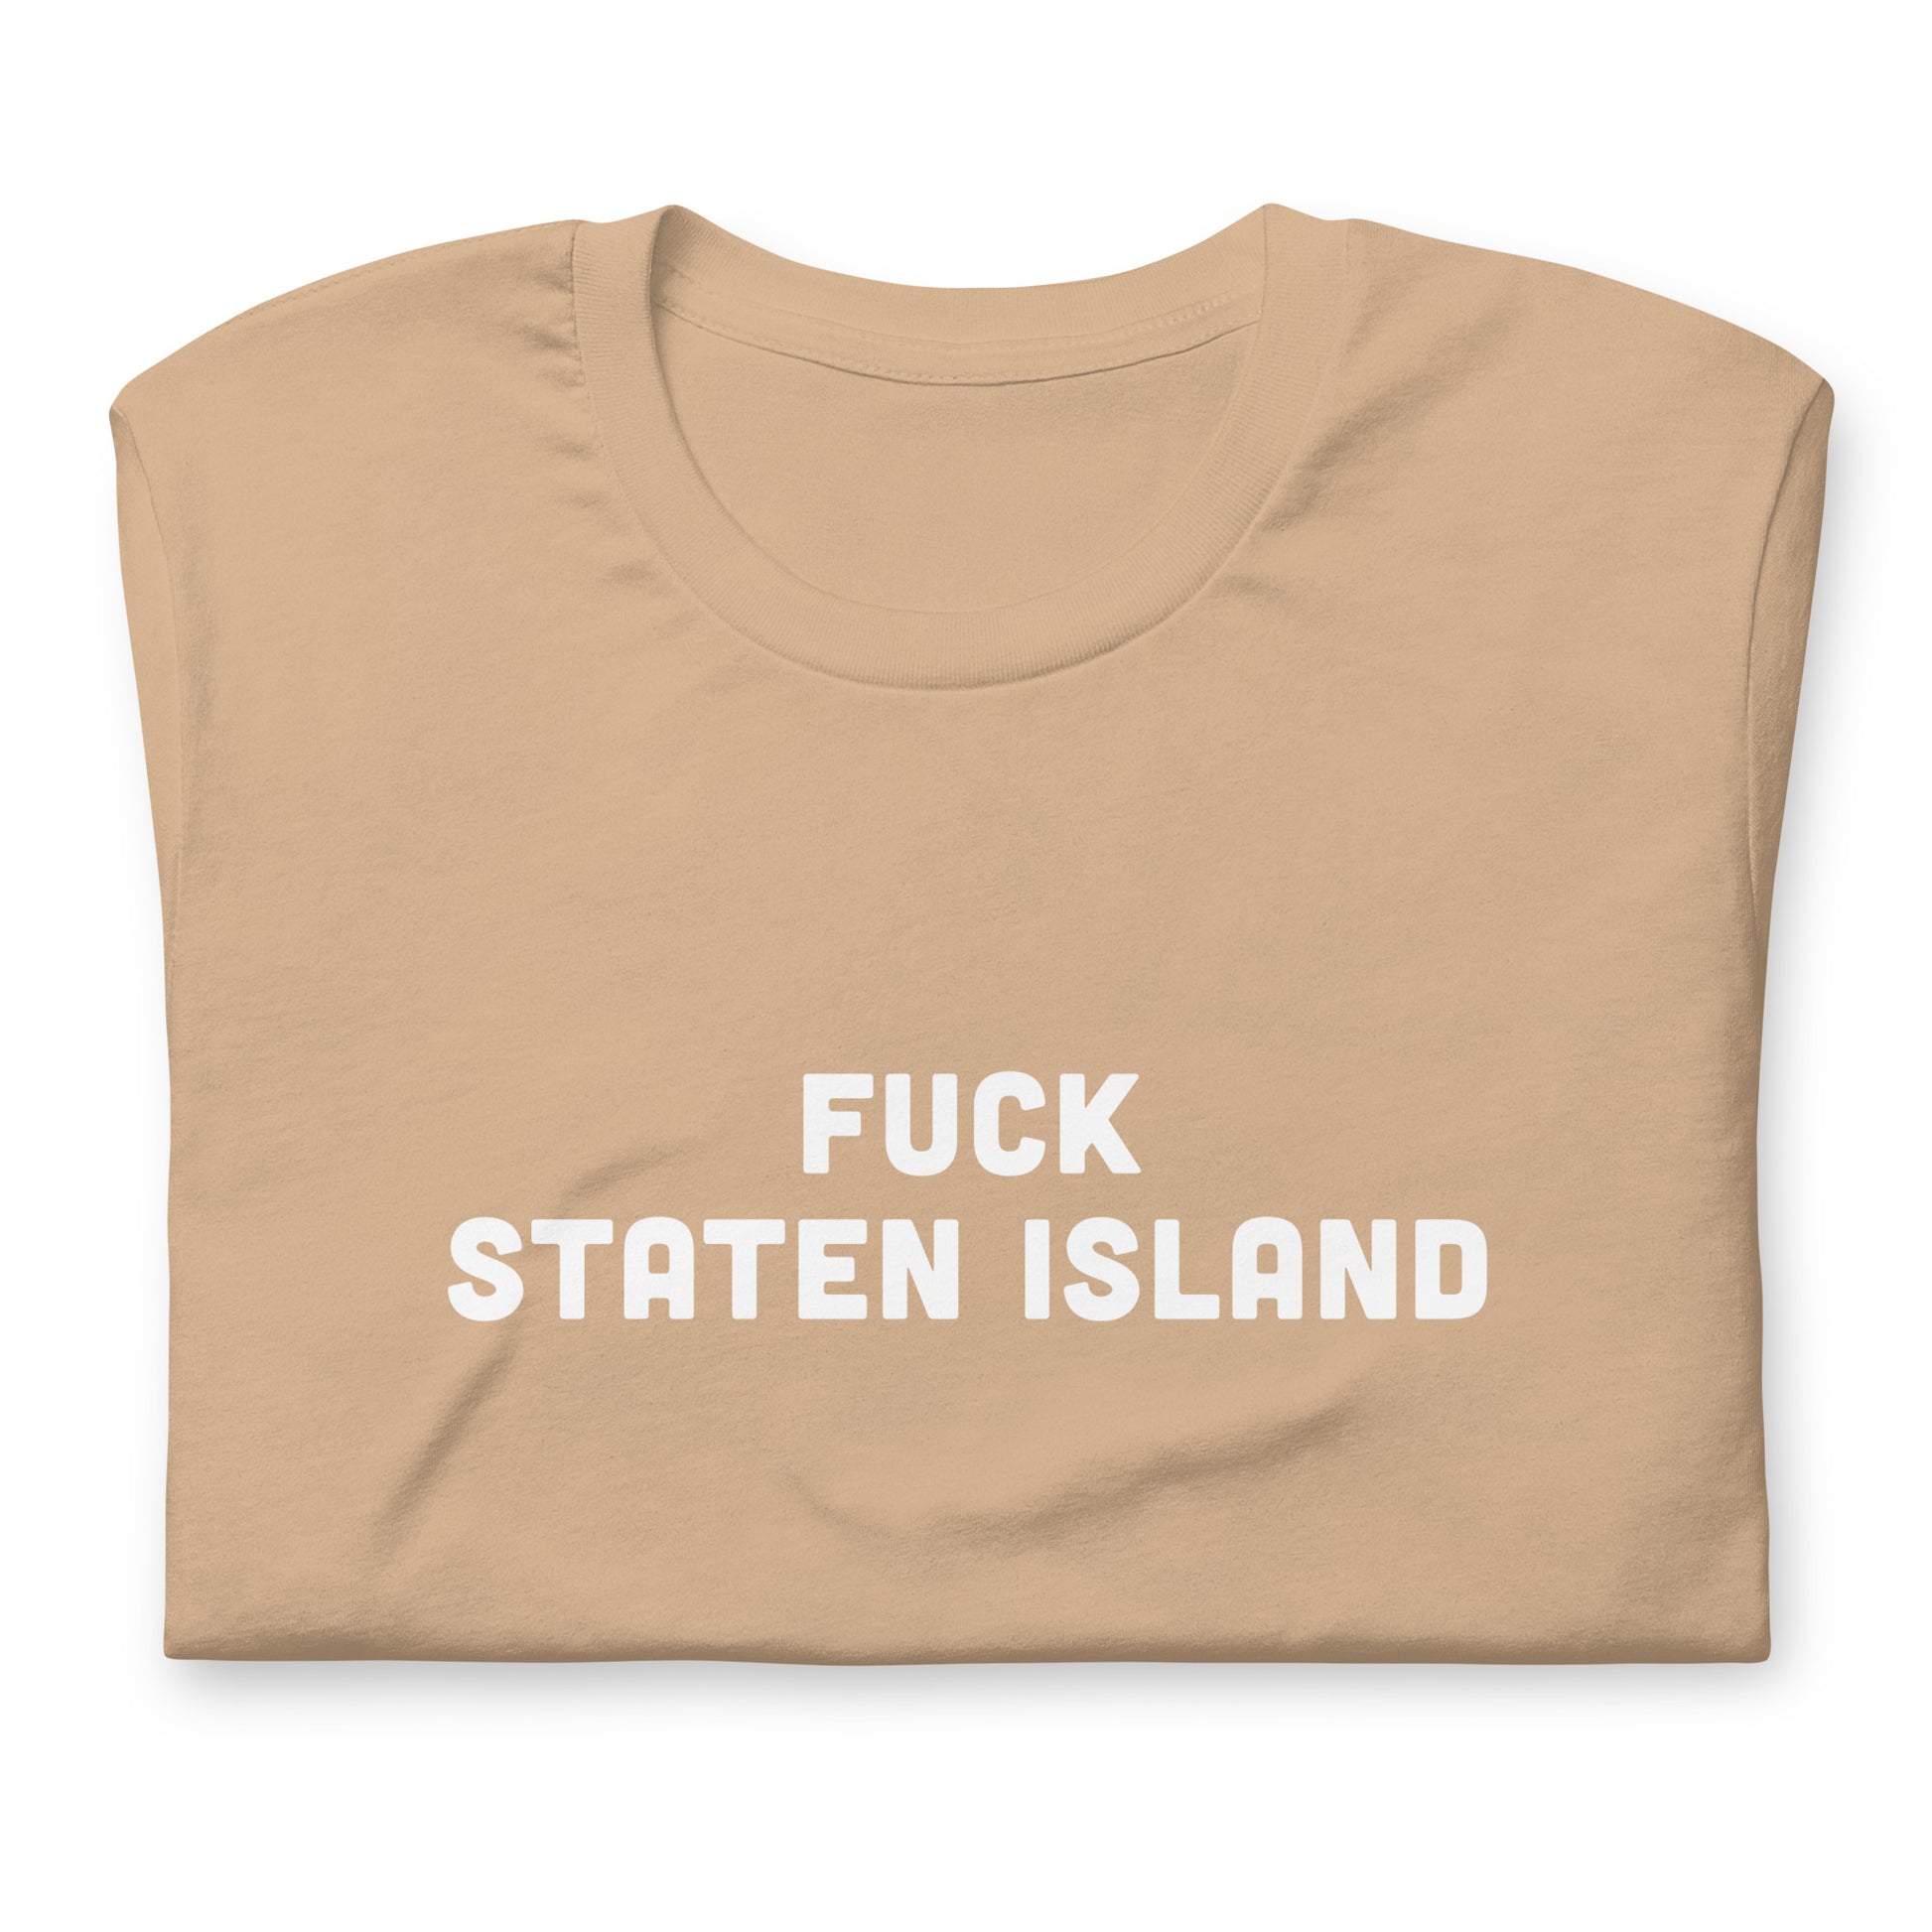 Fuck Staten Island T-Shirt Size XL Color Forest